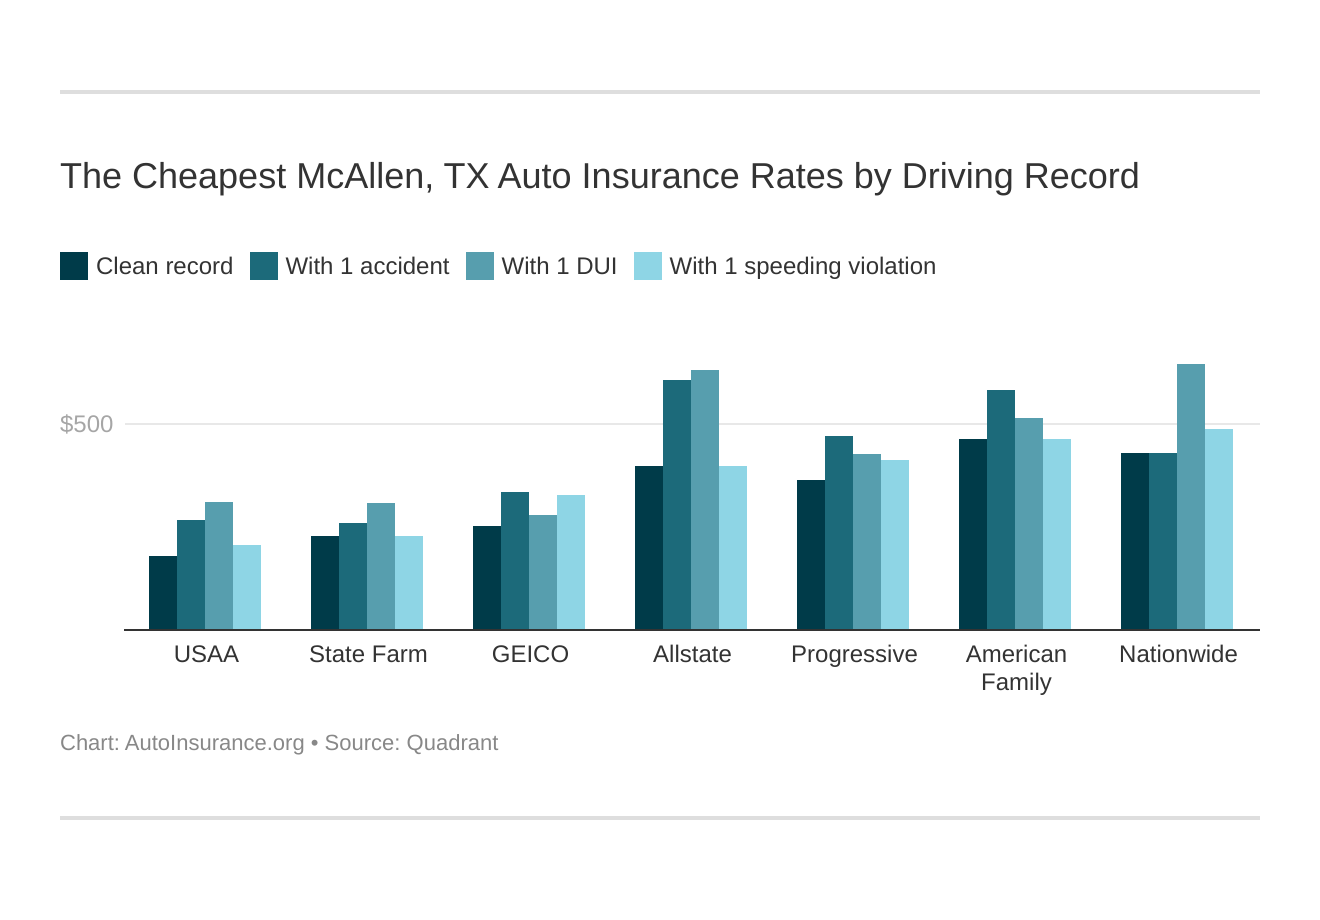 The Cheapest McAllen, TX Auto Insurance Rates by Driving Record